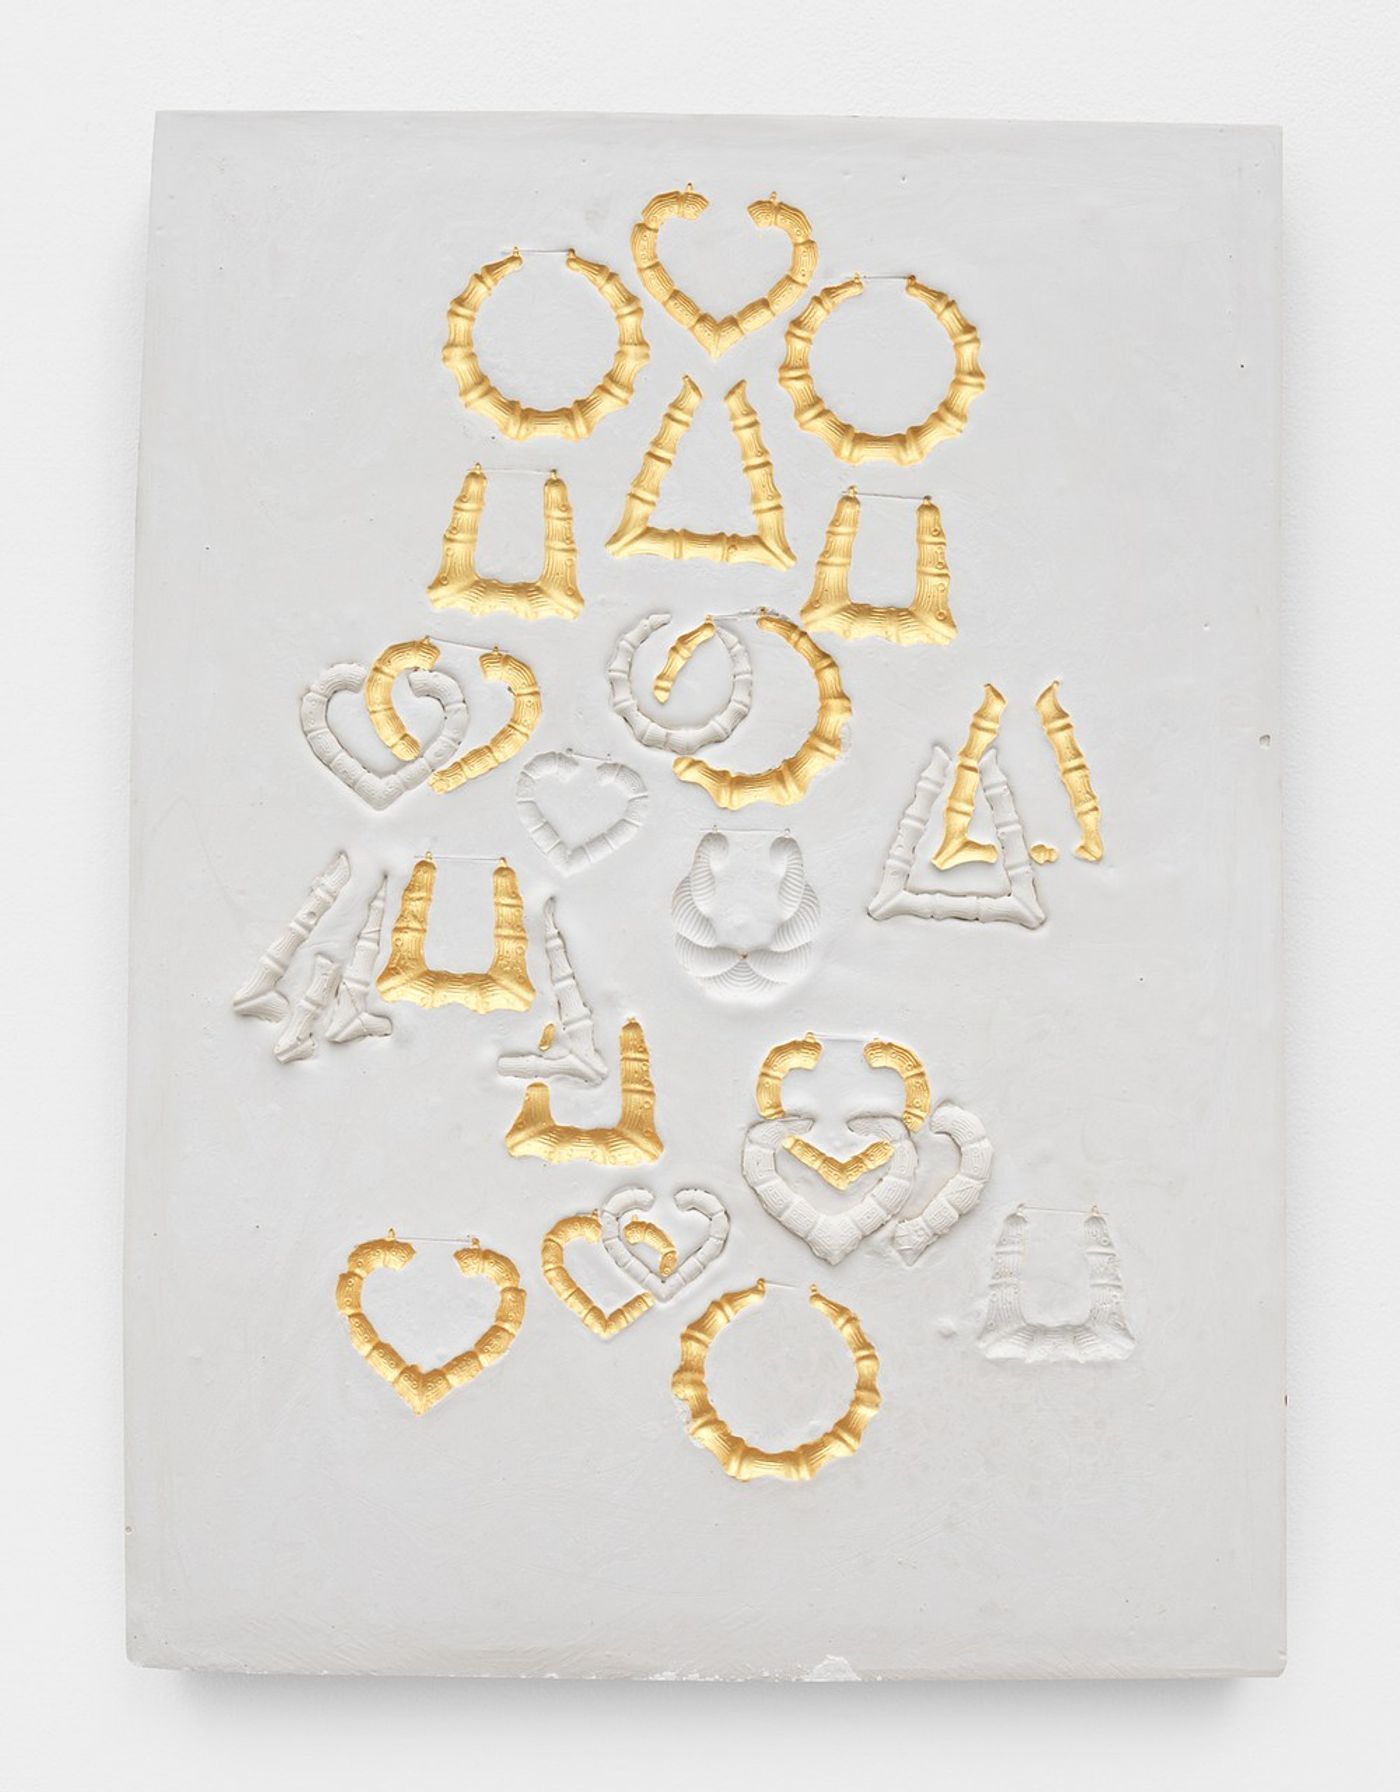 Image of Composition with Round earrings, Heart earrings and Bamboo Earrings with Fifteen Gold Impressions, 2021: Plaster and acrylic